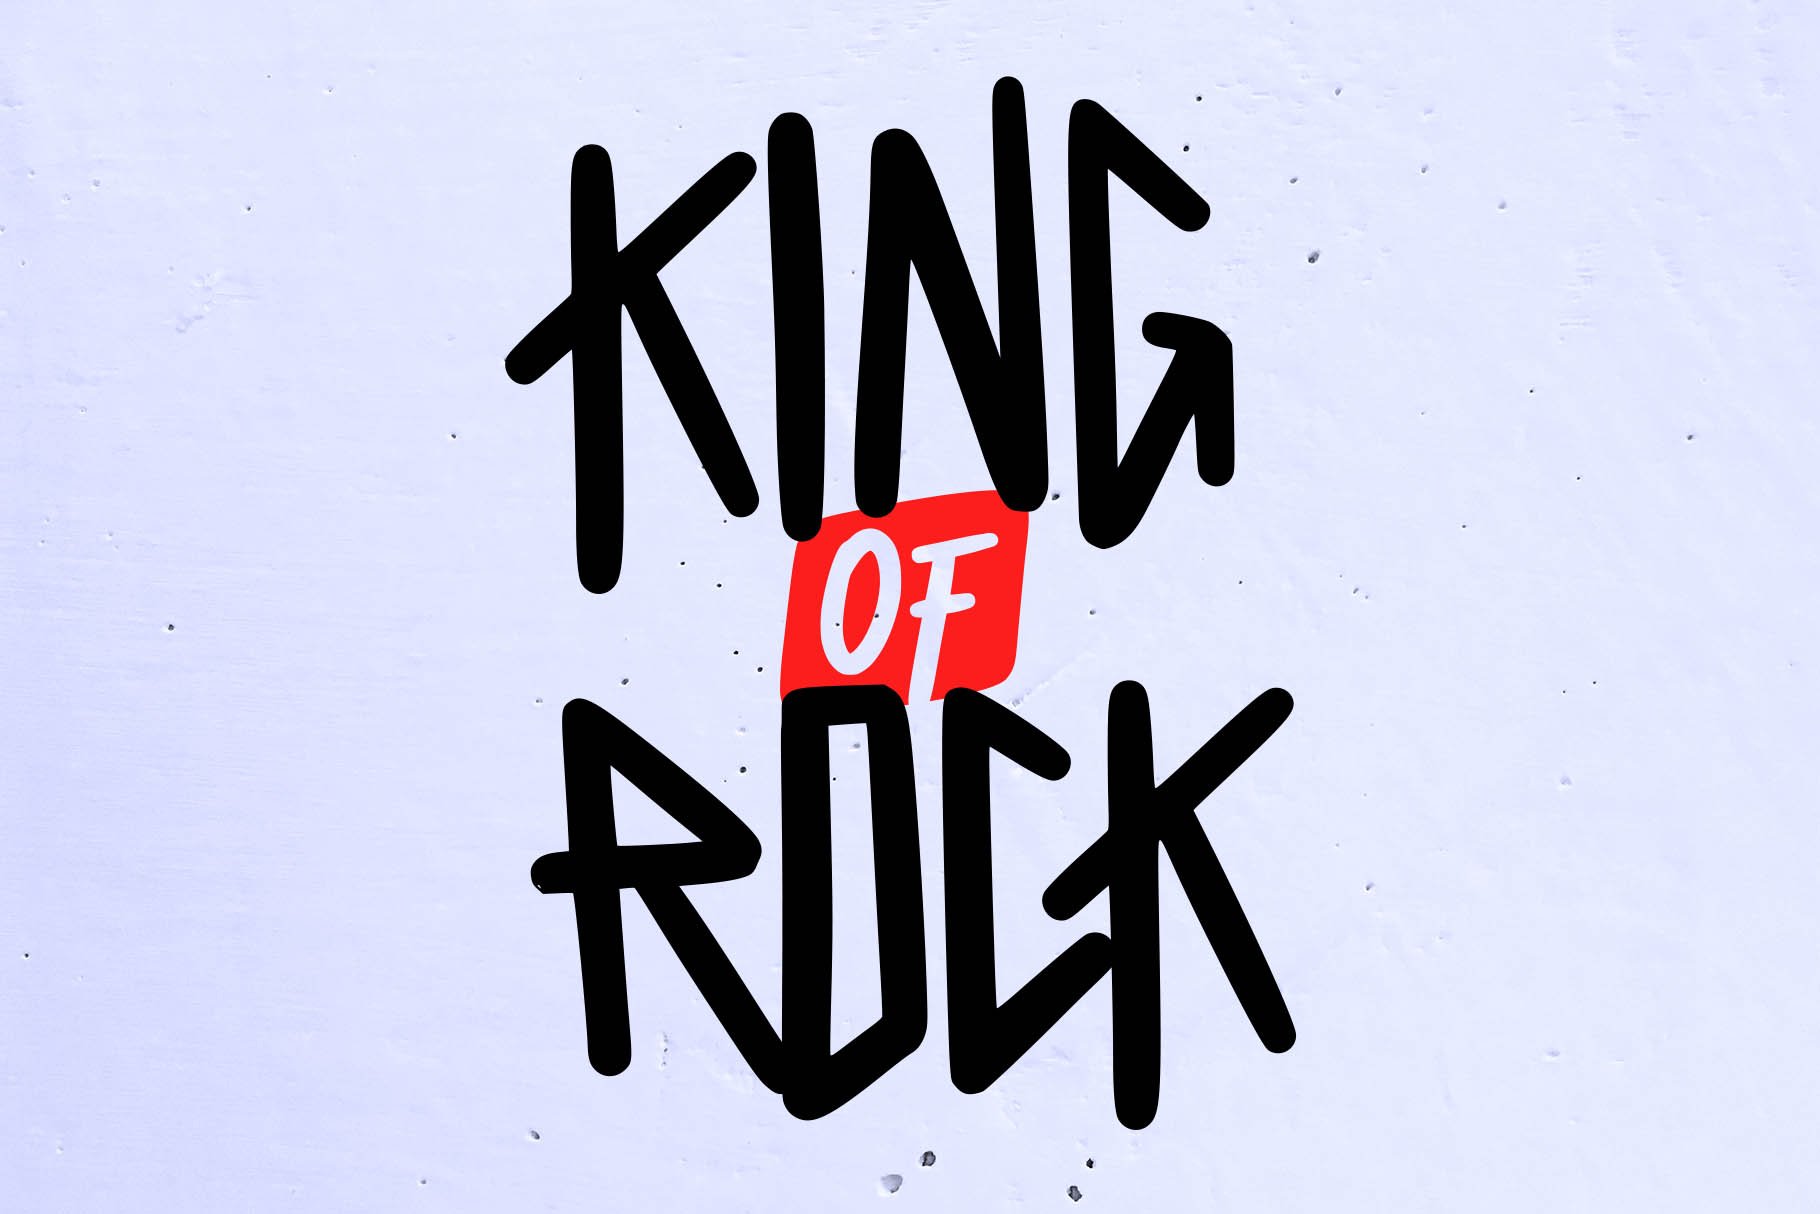 King of Rock Heavy Metal Font cover image.